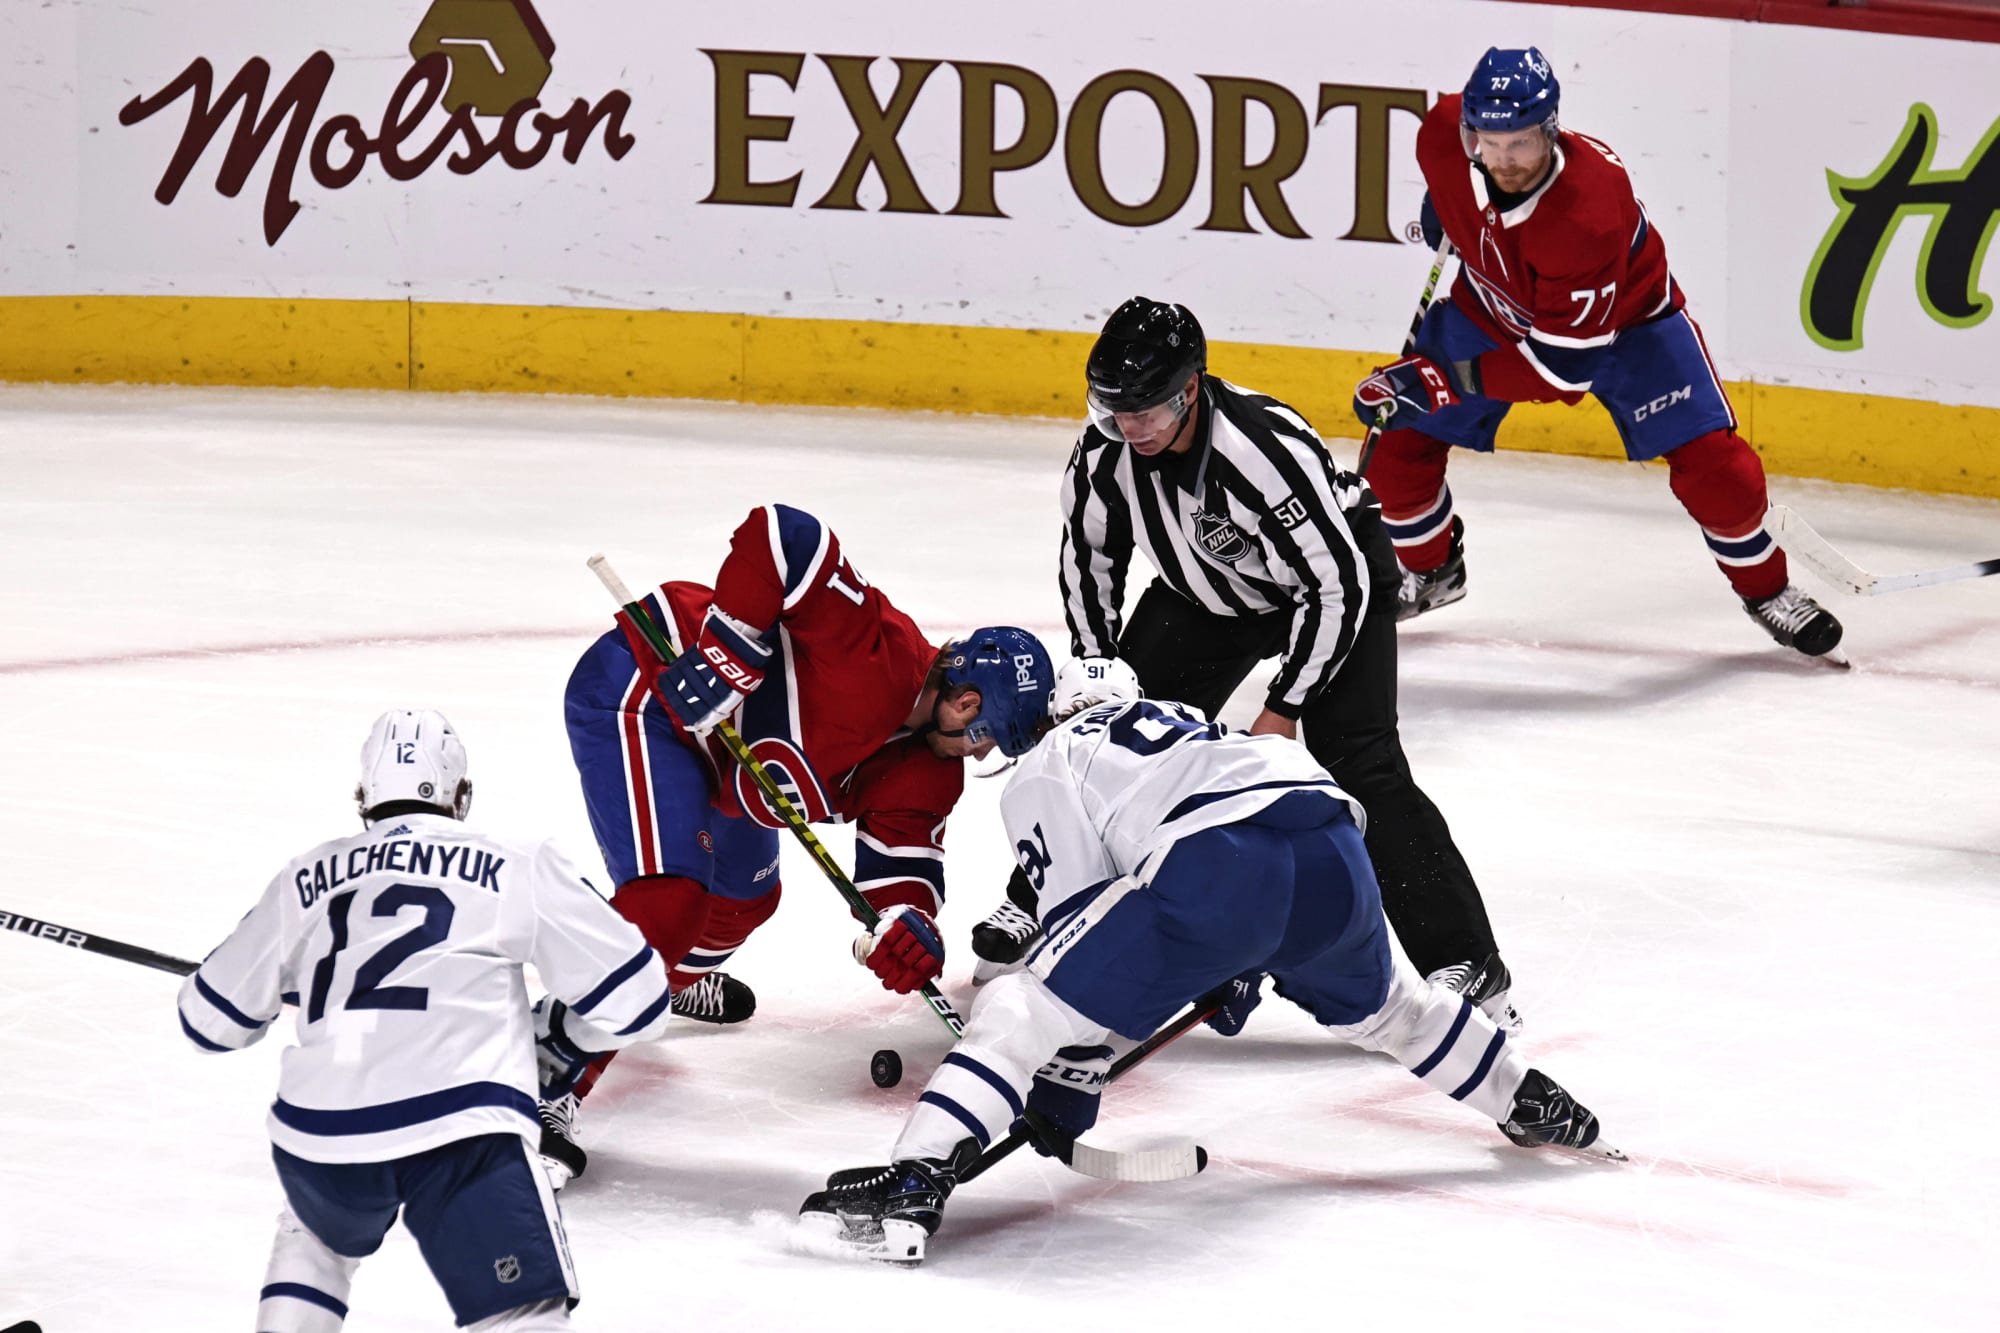 Playoff Matchup Toronto Maple Leafs vs Montreal Canadiens